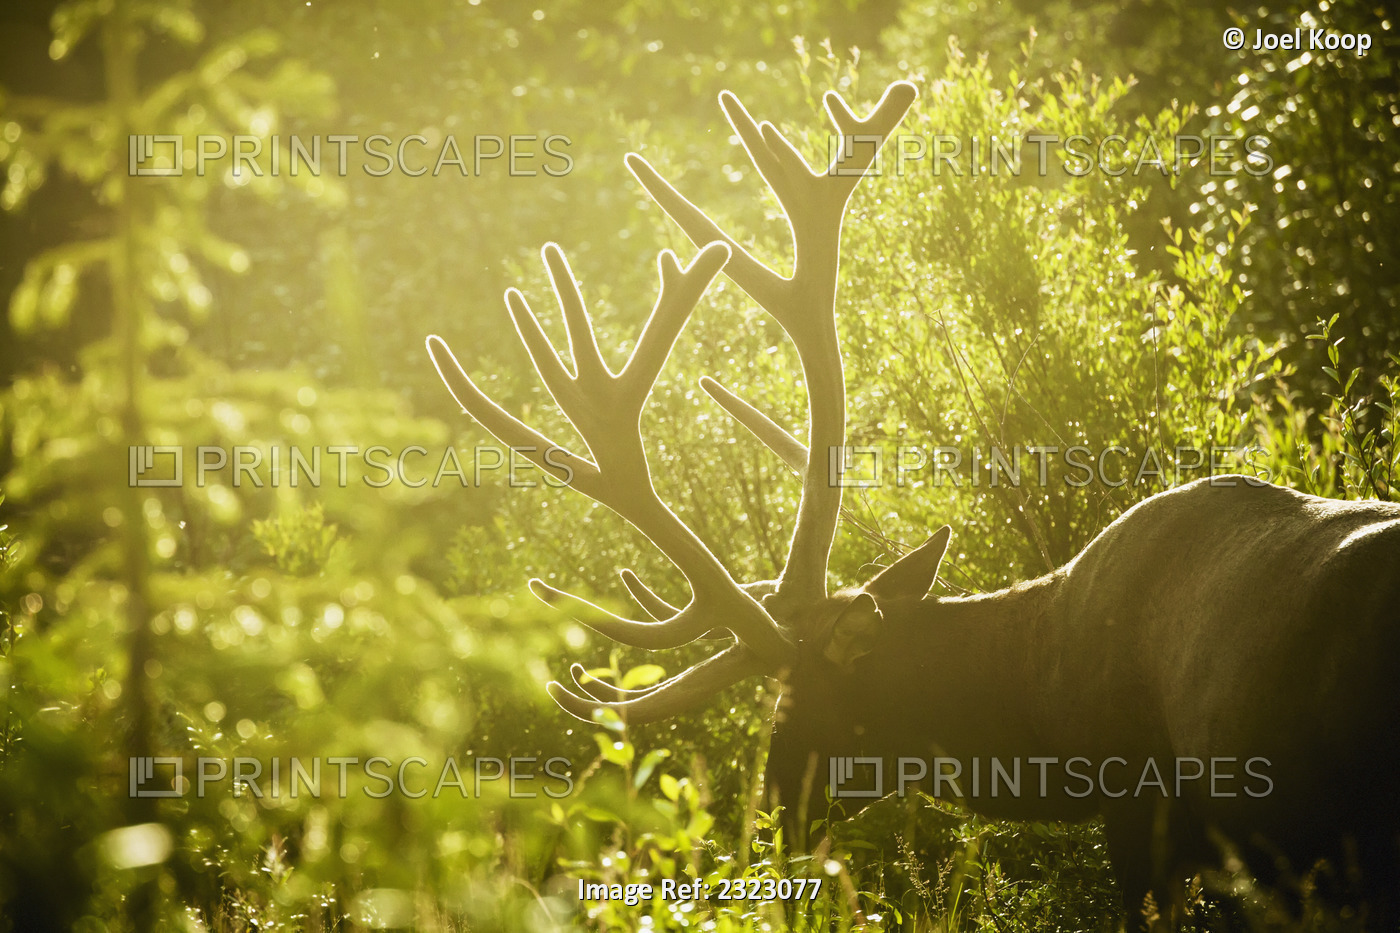 An elk (cervus canadensis) with large antlers grazing in warm evening light, ...